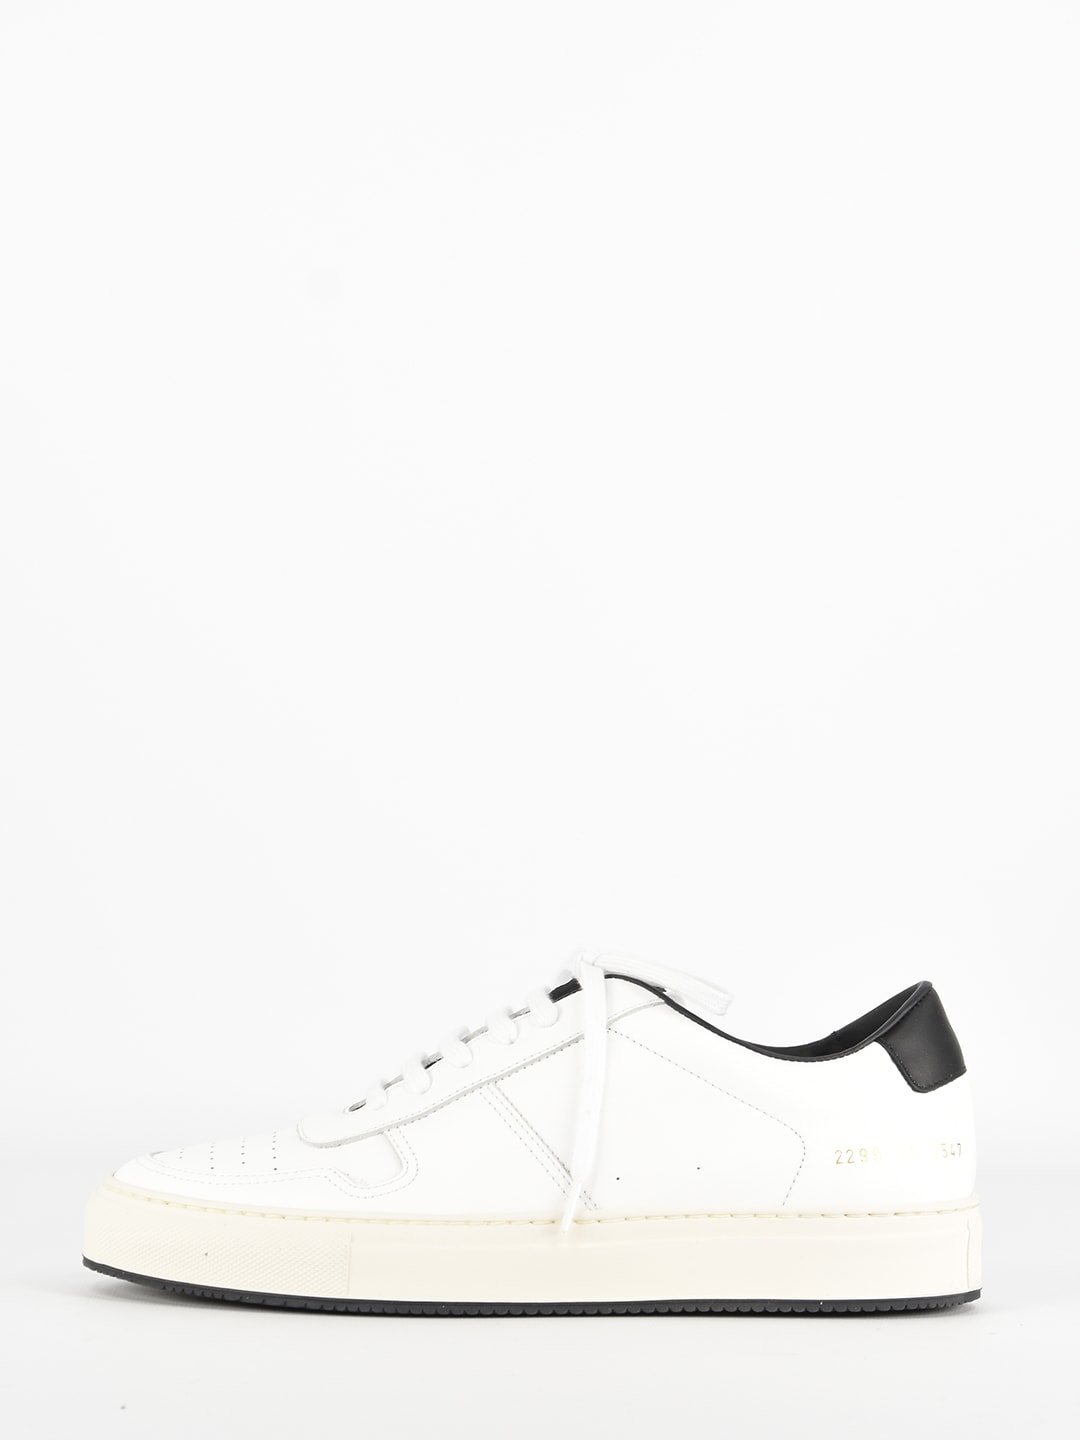 Common Projects Bball 90 Sneaker